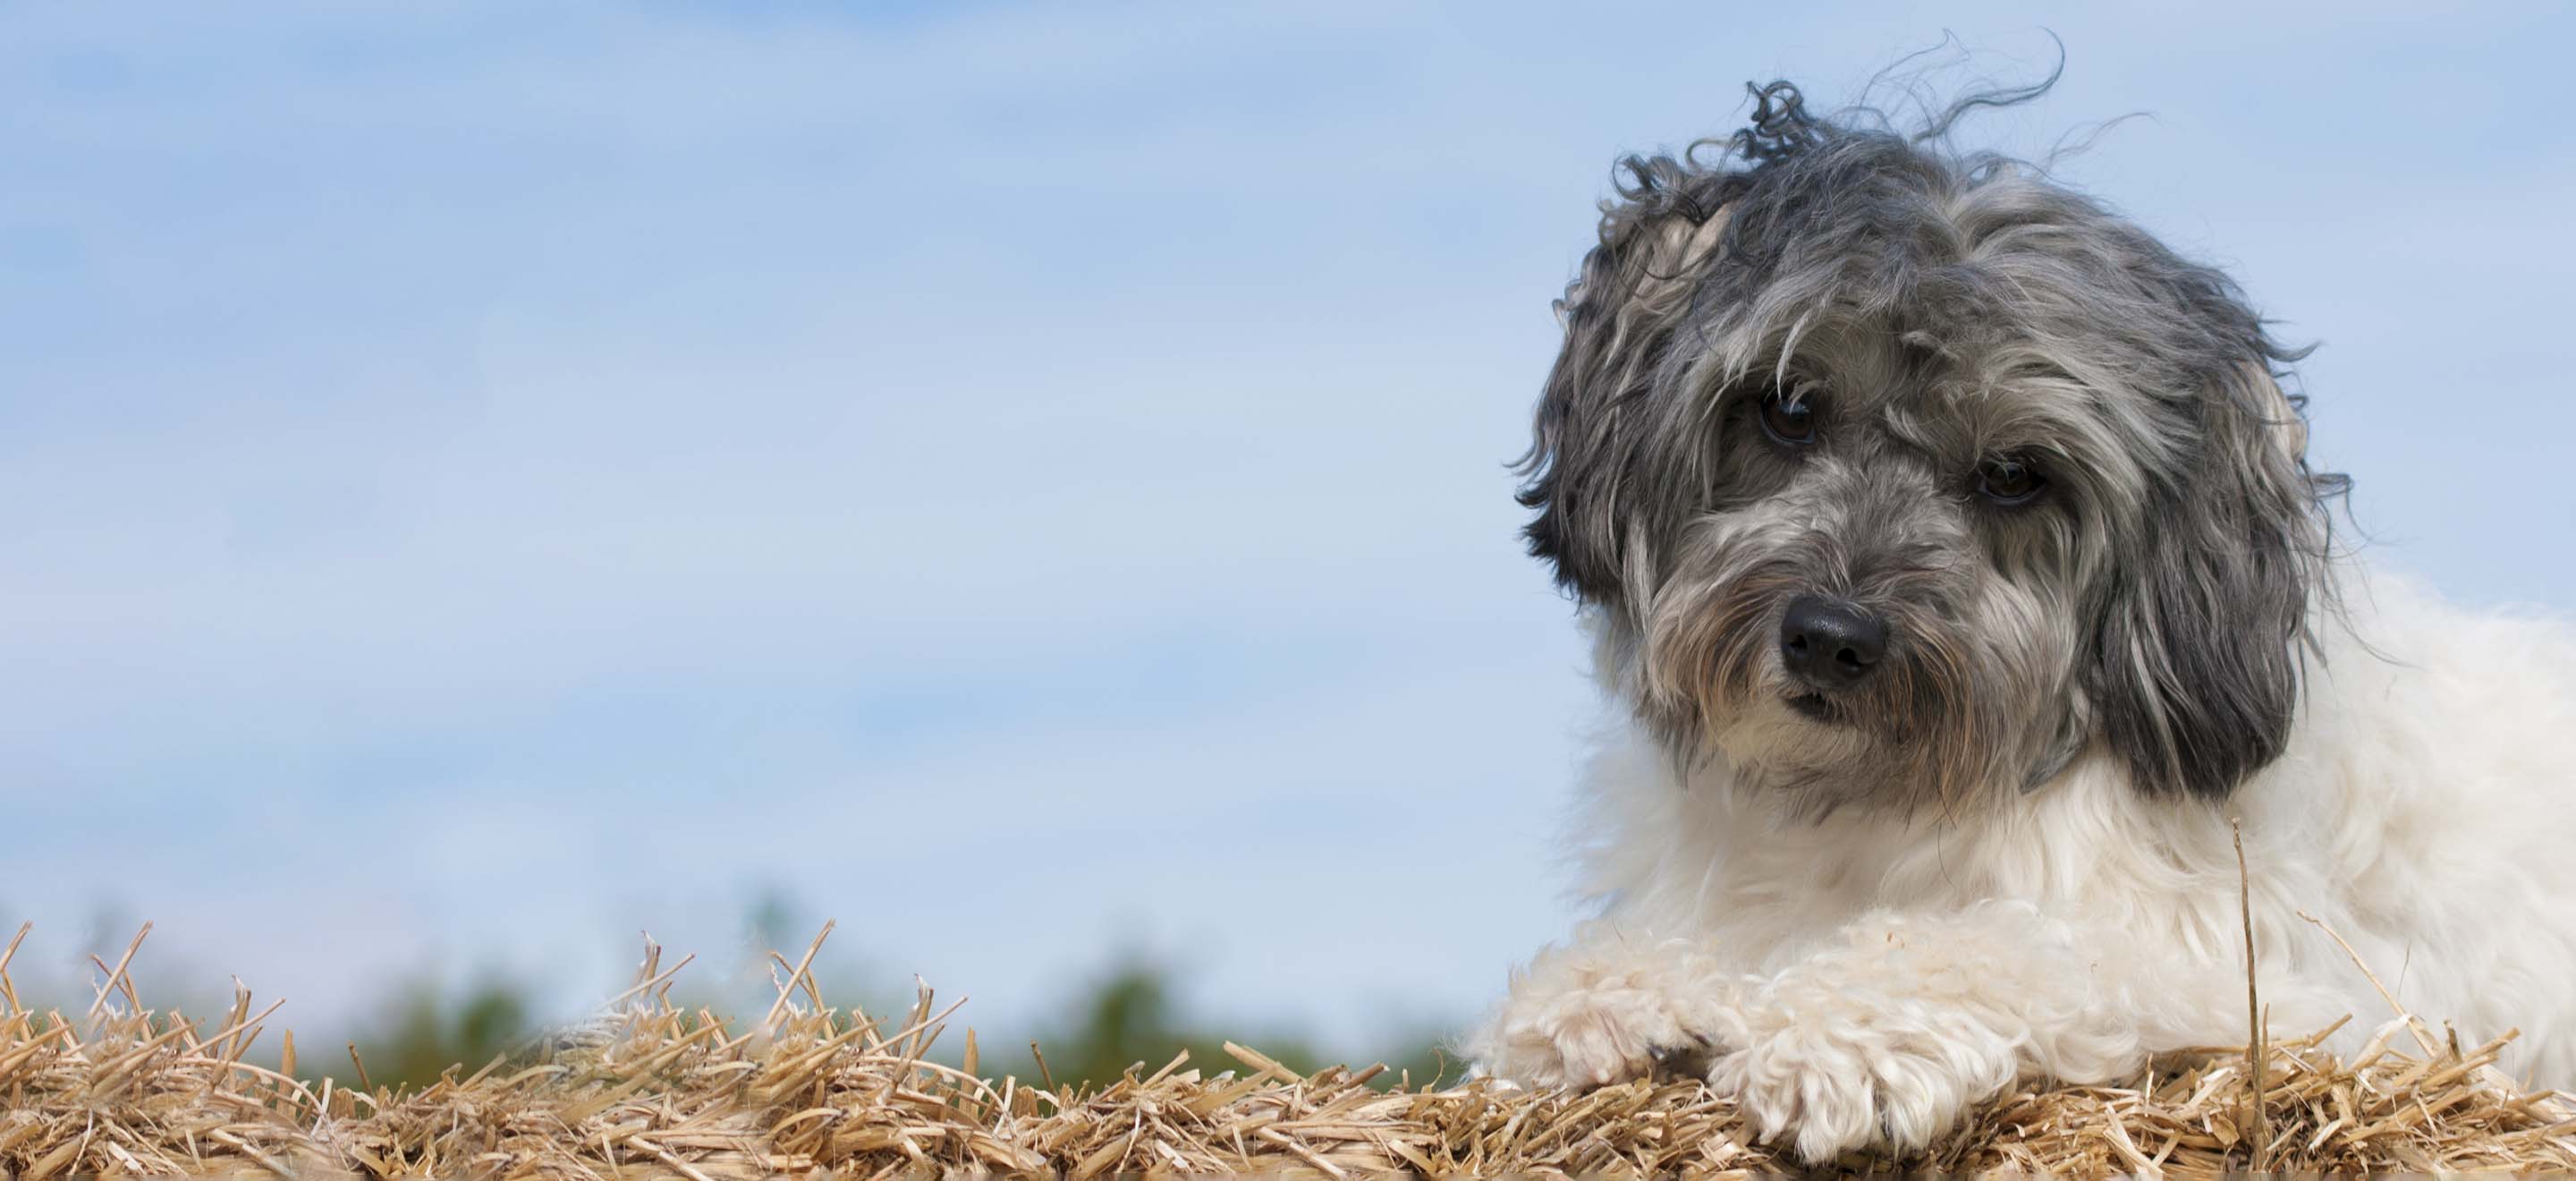 A white and gray Lowchen dog sitting on hay in front of a blue sky image